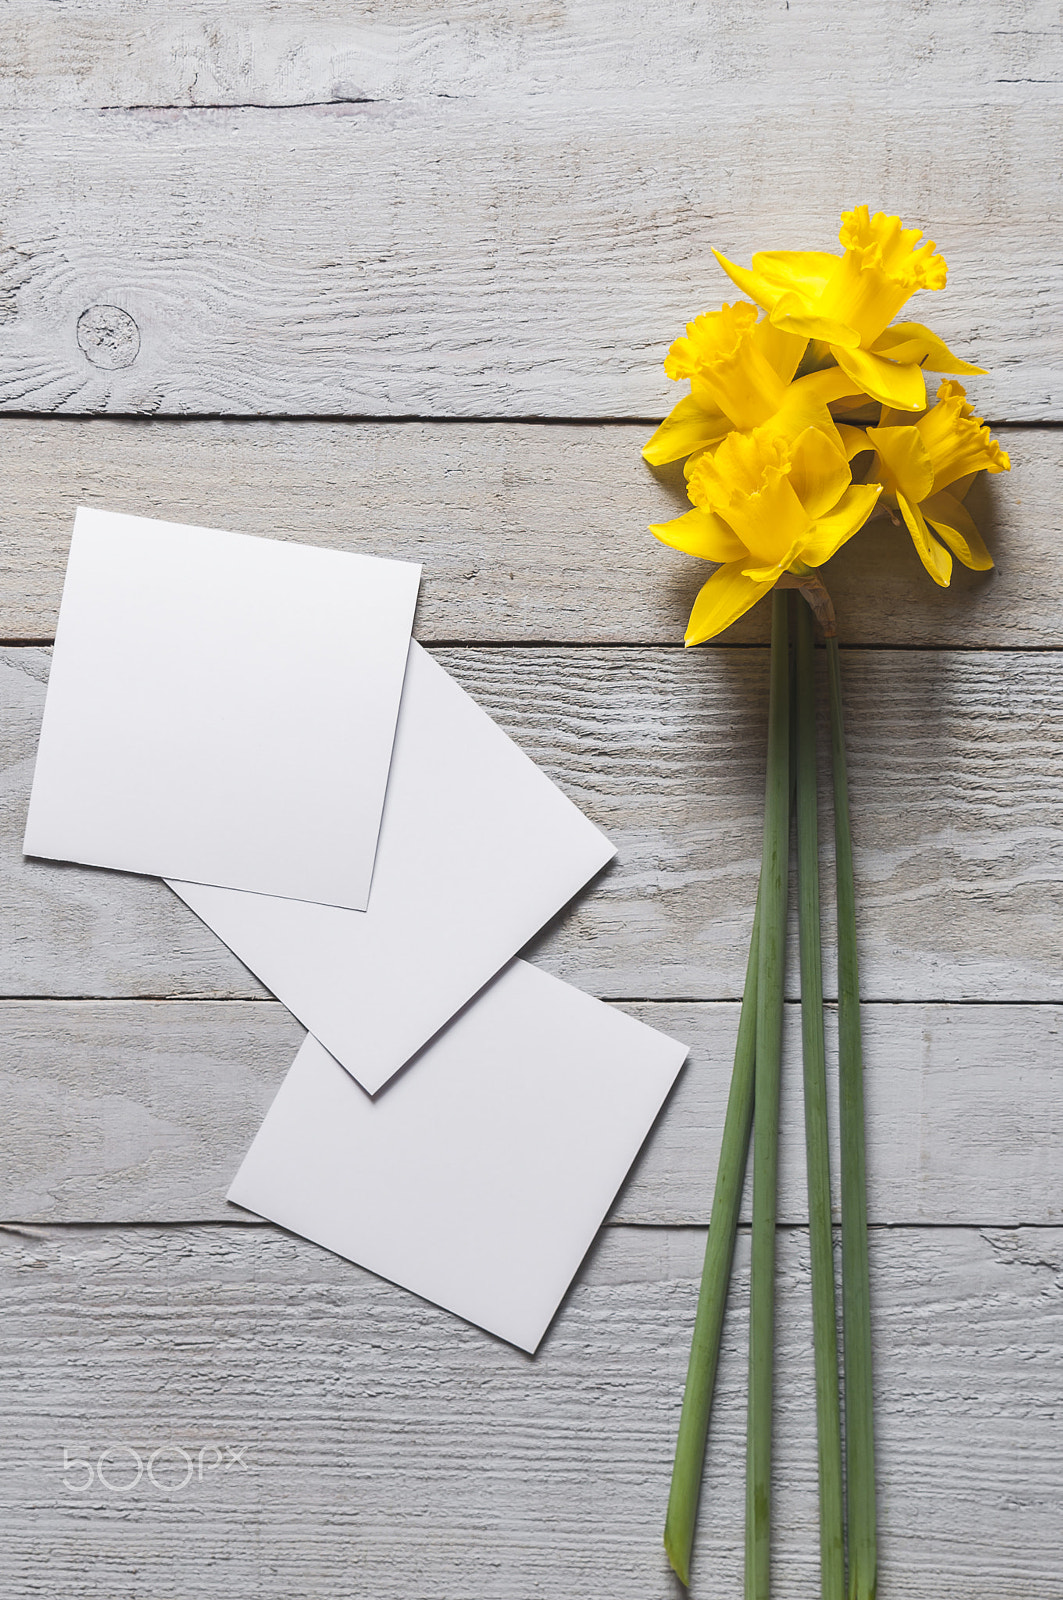 Nikon D90 + Tamron SP 24-70mm F2.8 Di VC USD sample photo. Yellow narcissus flowers and blank paper pieces on wooden background photography